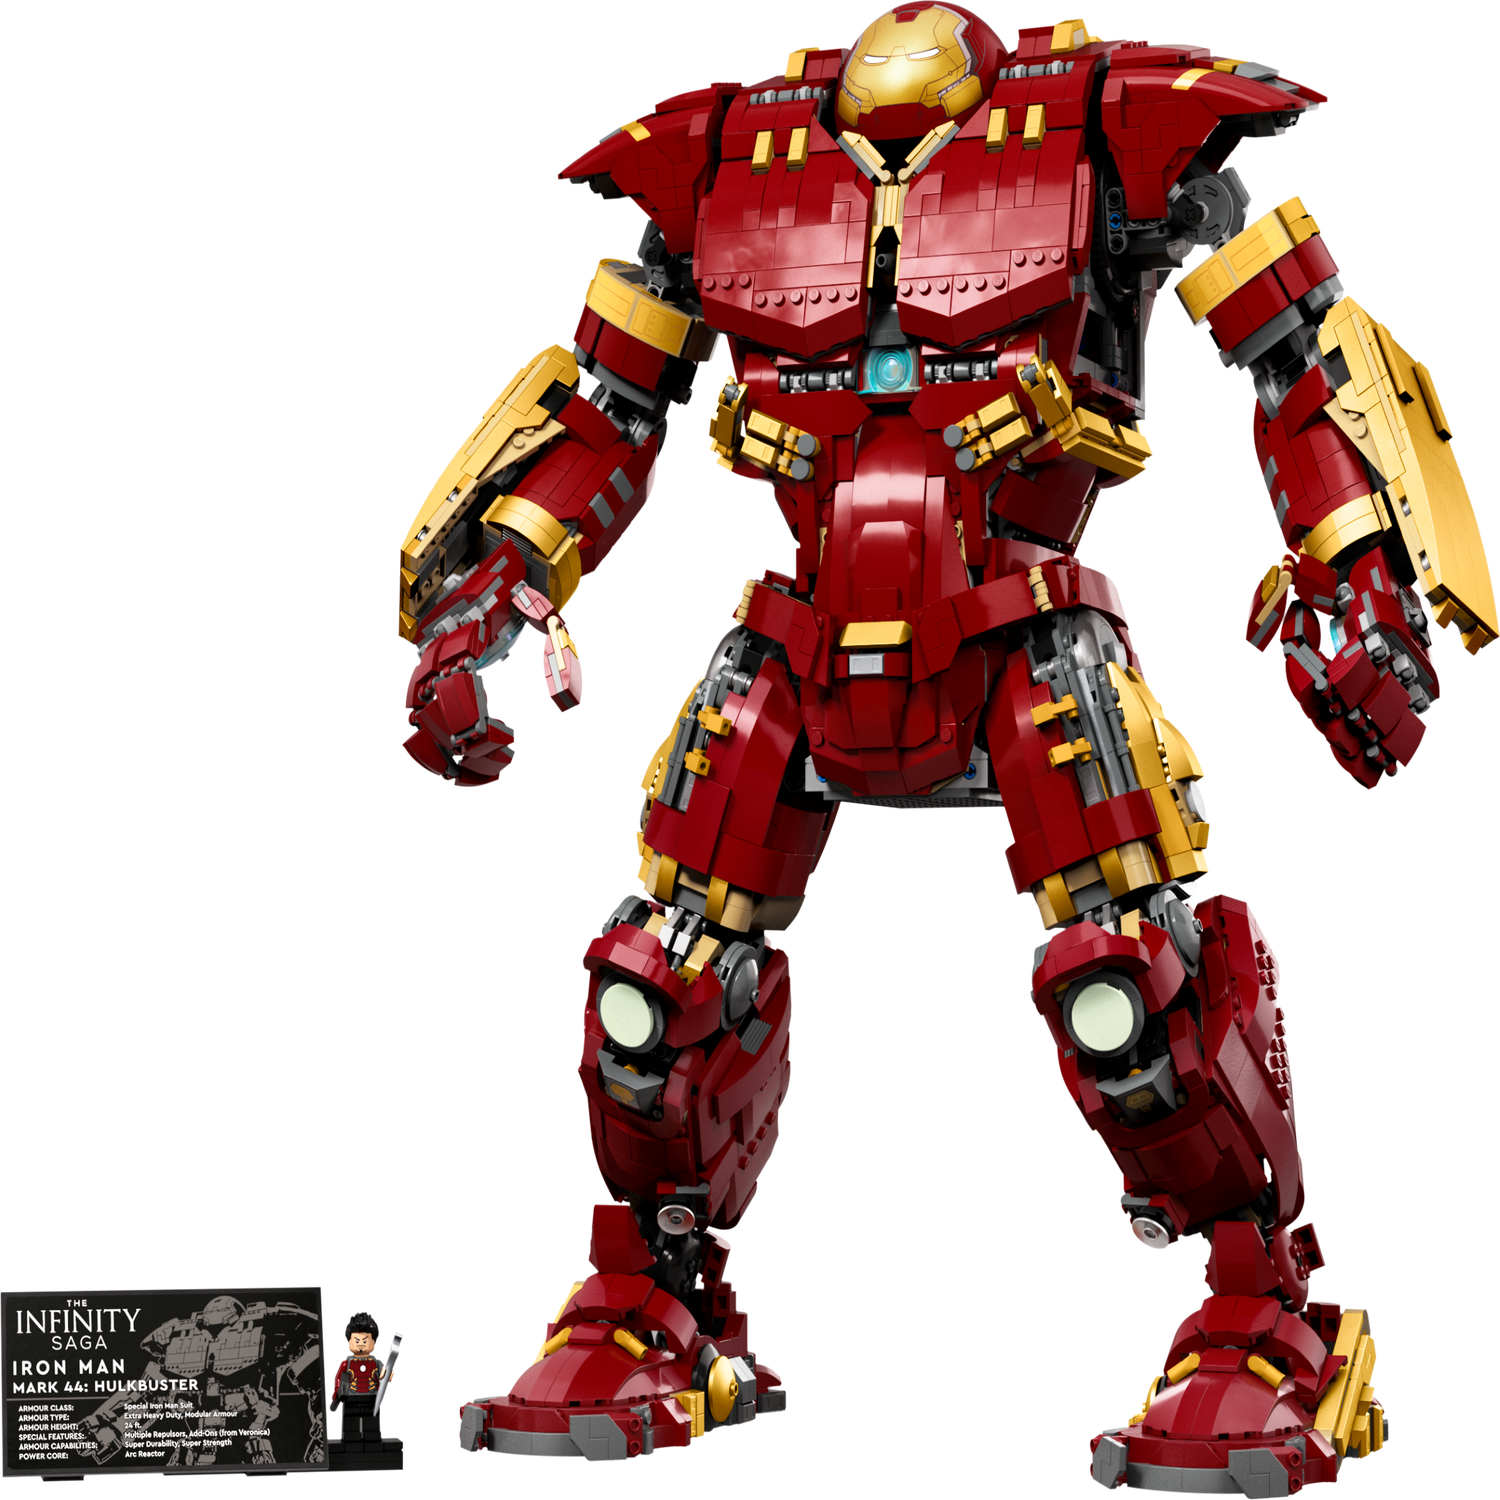 LEGO Marvel Iron Man Figure 76206 Collectible Buildable Toy, Kids